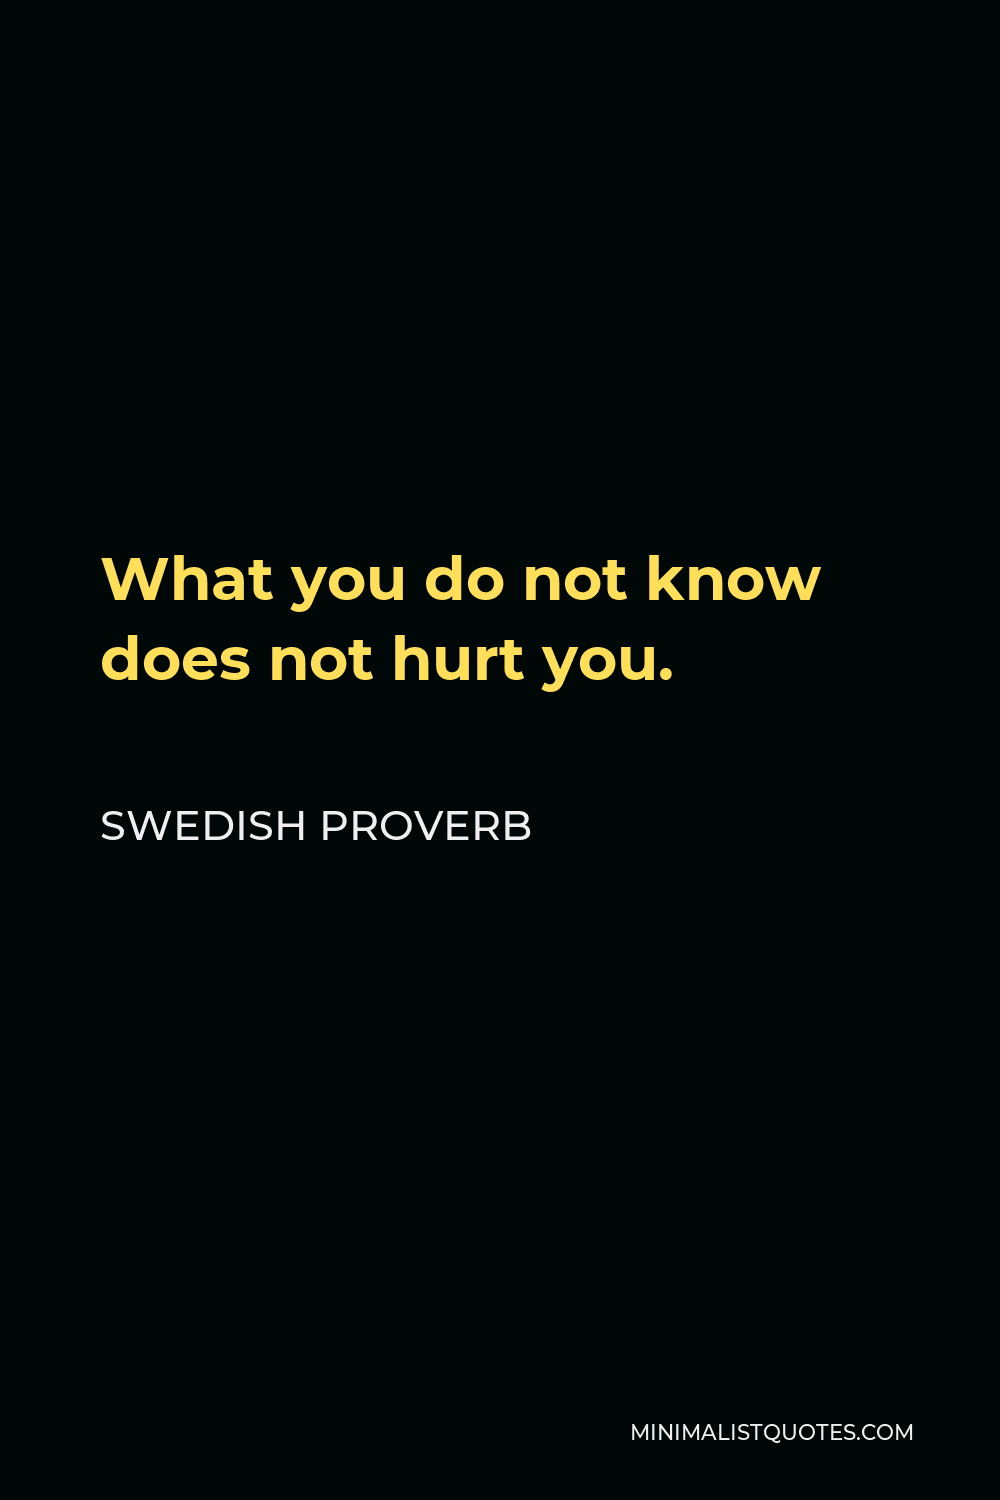 Swedish Proverb Quote - What you do not know does not hurt you.